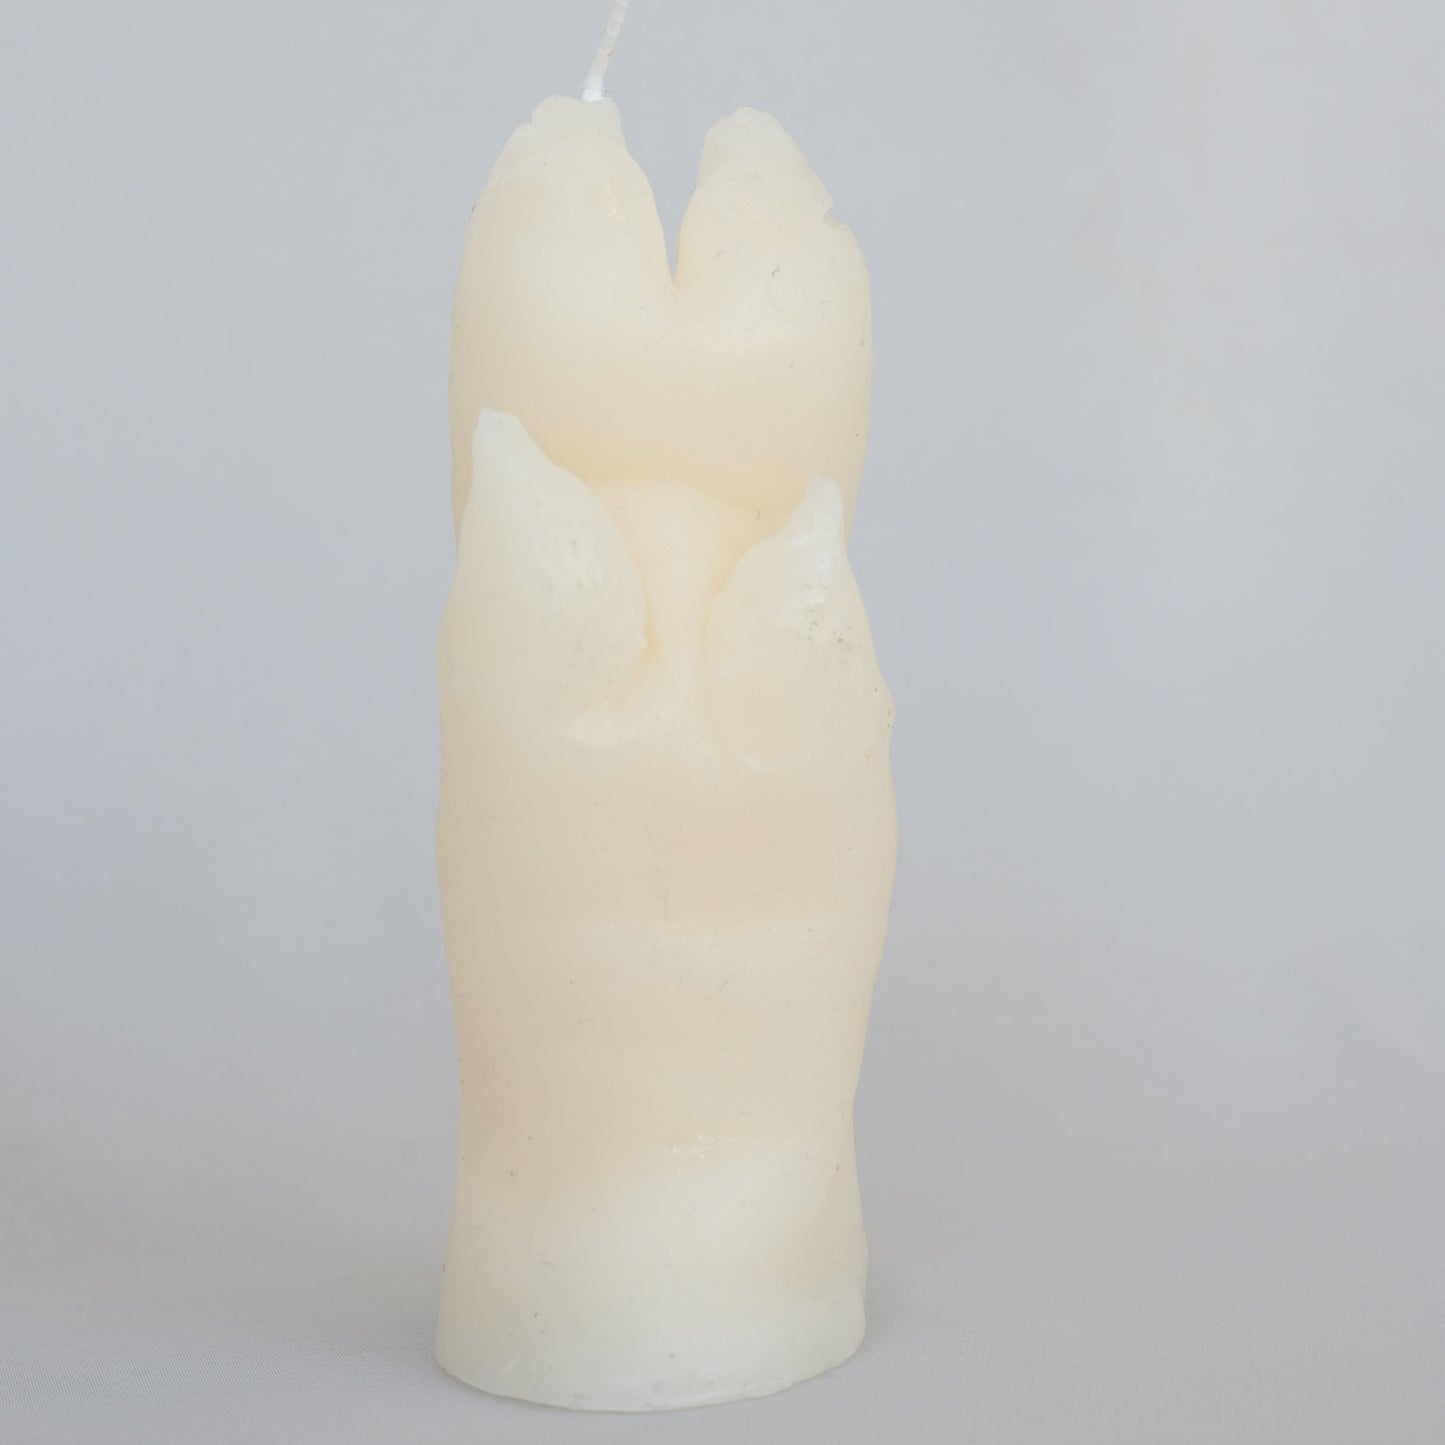 Steph Huang: Porky Pig Candle